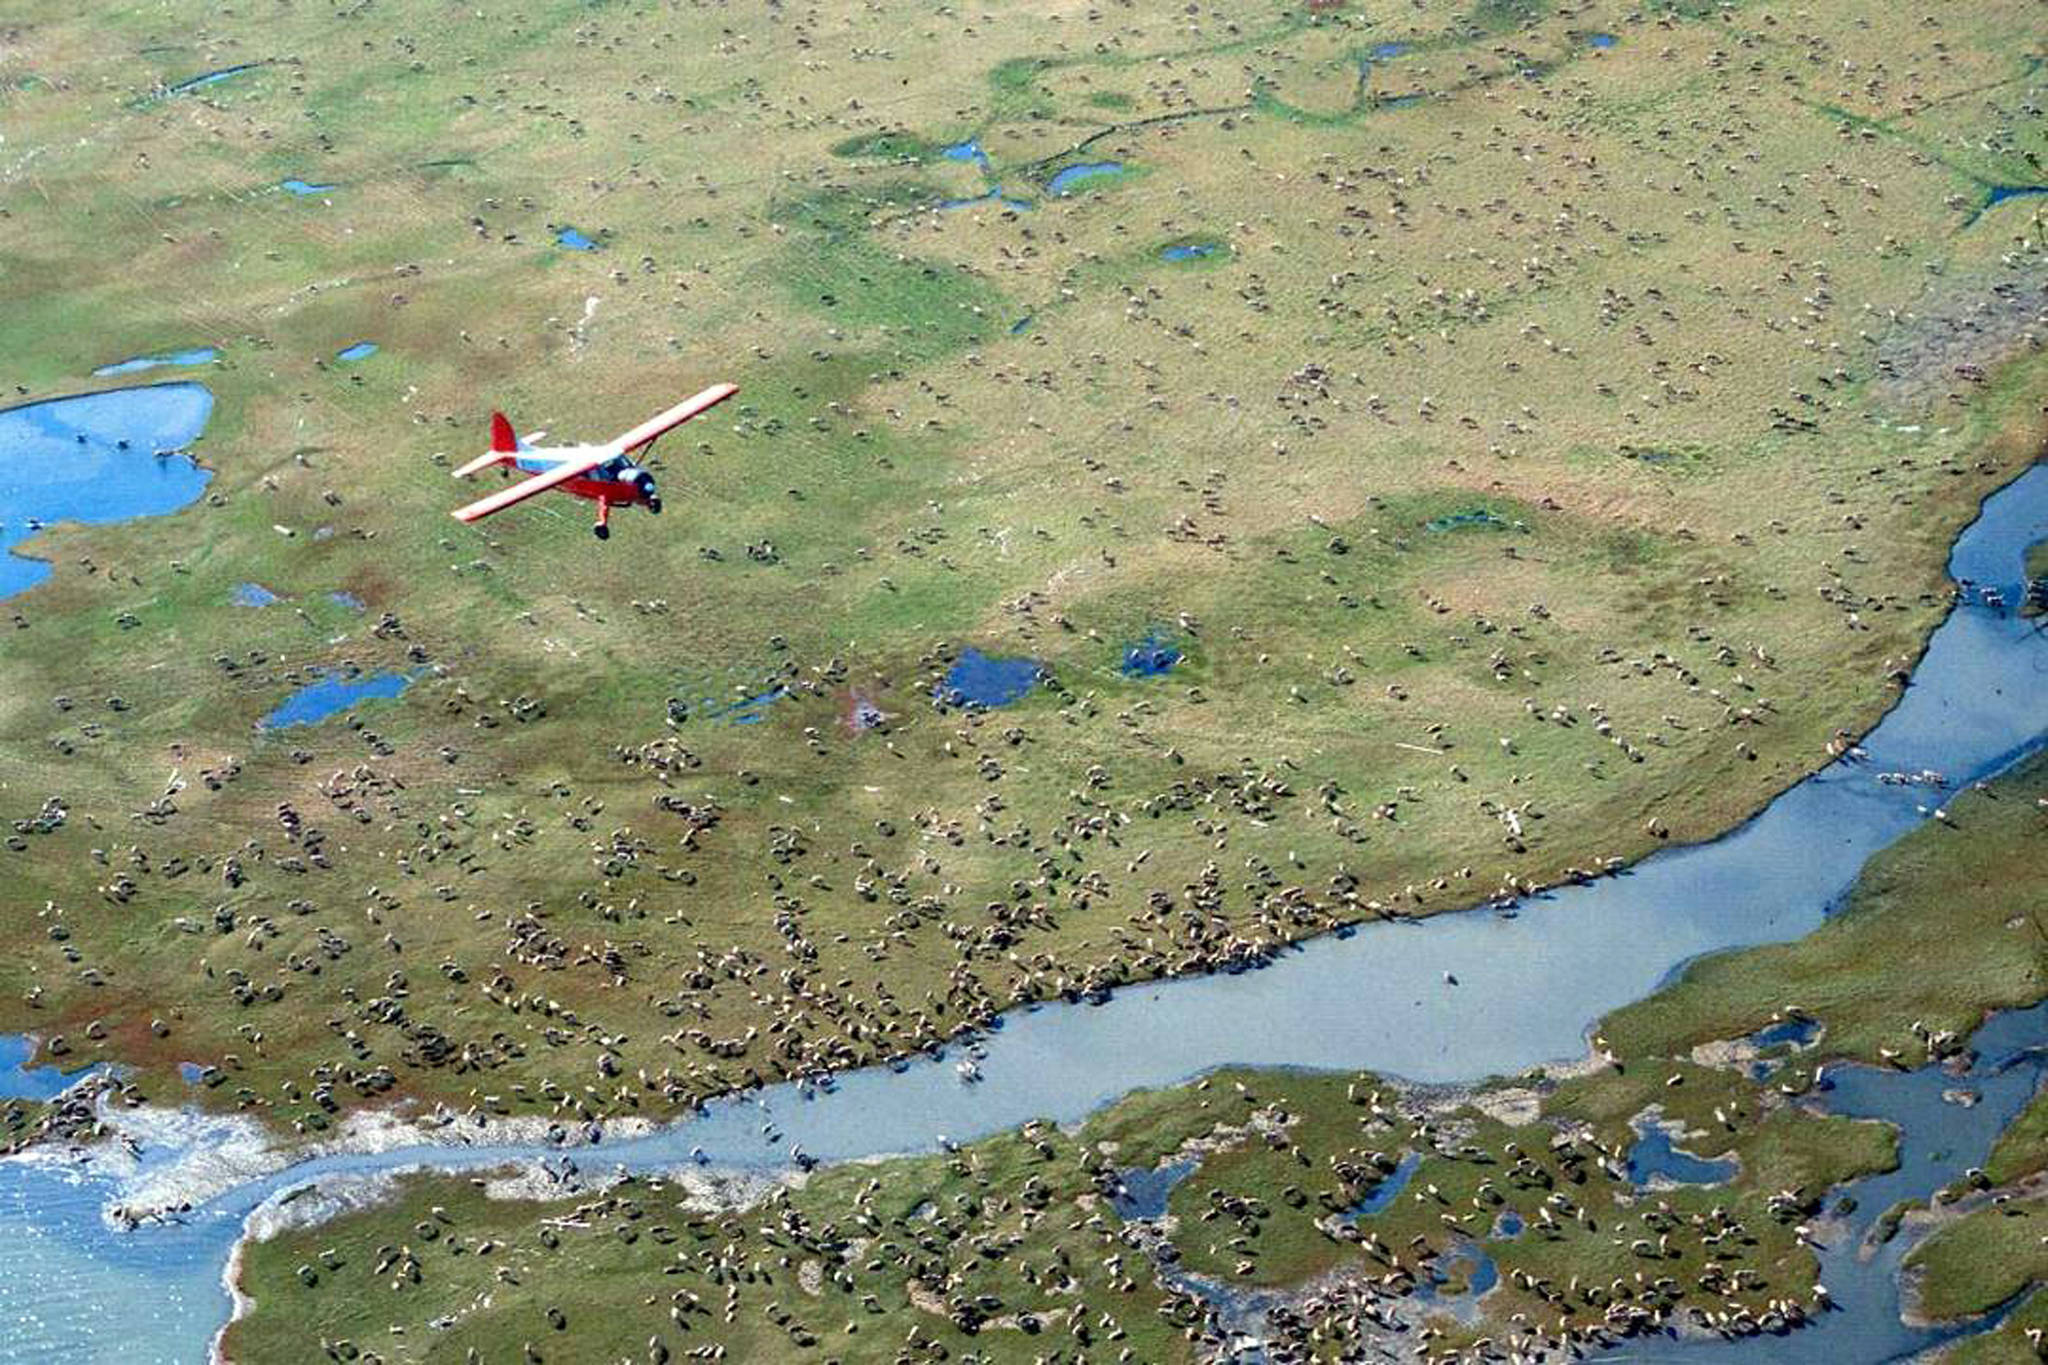 In this undated file photo provided by the U.S. Fish and Wildlife Service, an airplane flies over caribou from the Porcupine caribou herd on the coastal plain of the Arctic National Wildlife Refuge in northeast Alaska. (U.S. Fish and Wildlife Service)